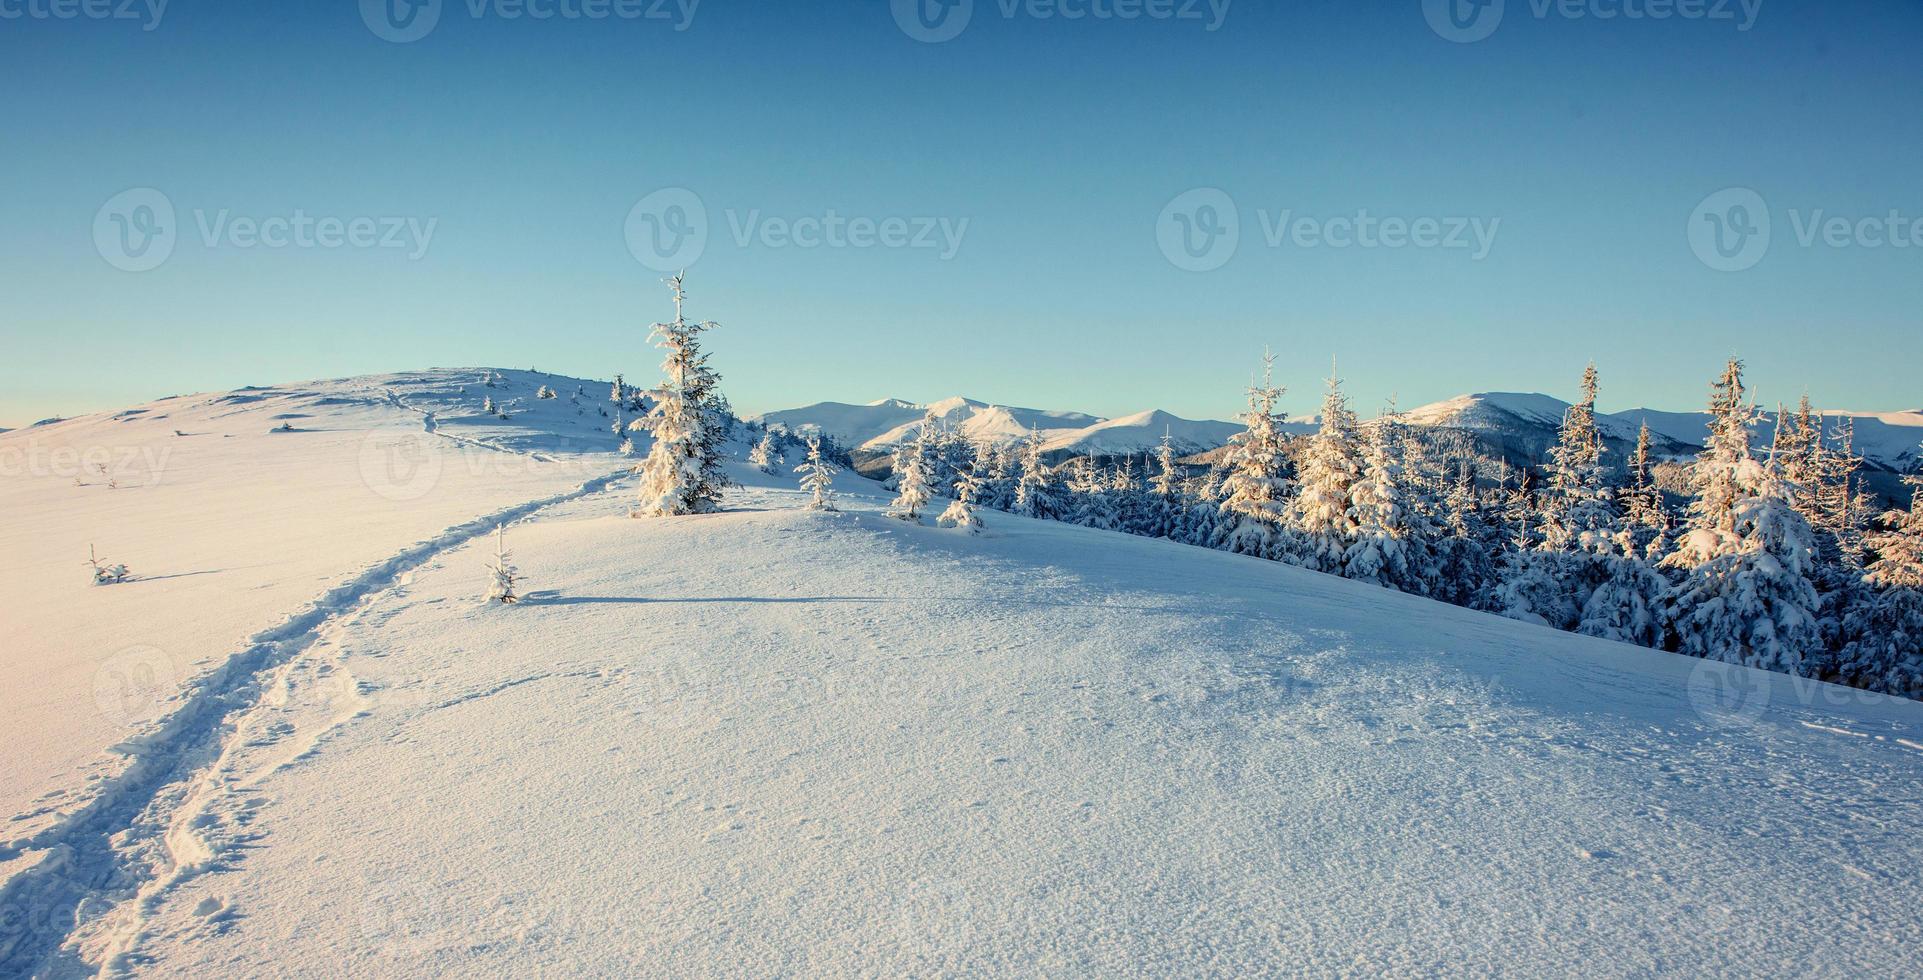 Fantastic winter landscape and trodden trails that lead into the photo